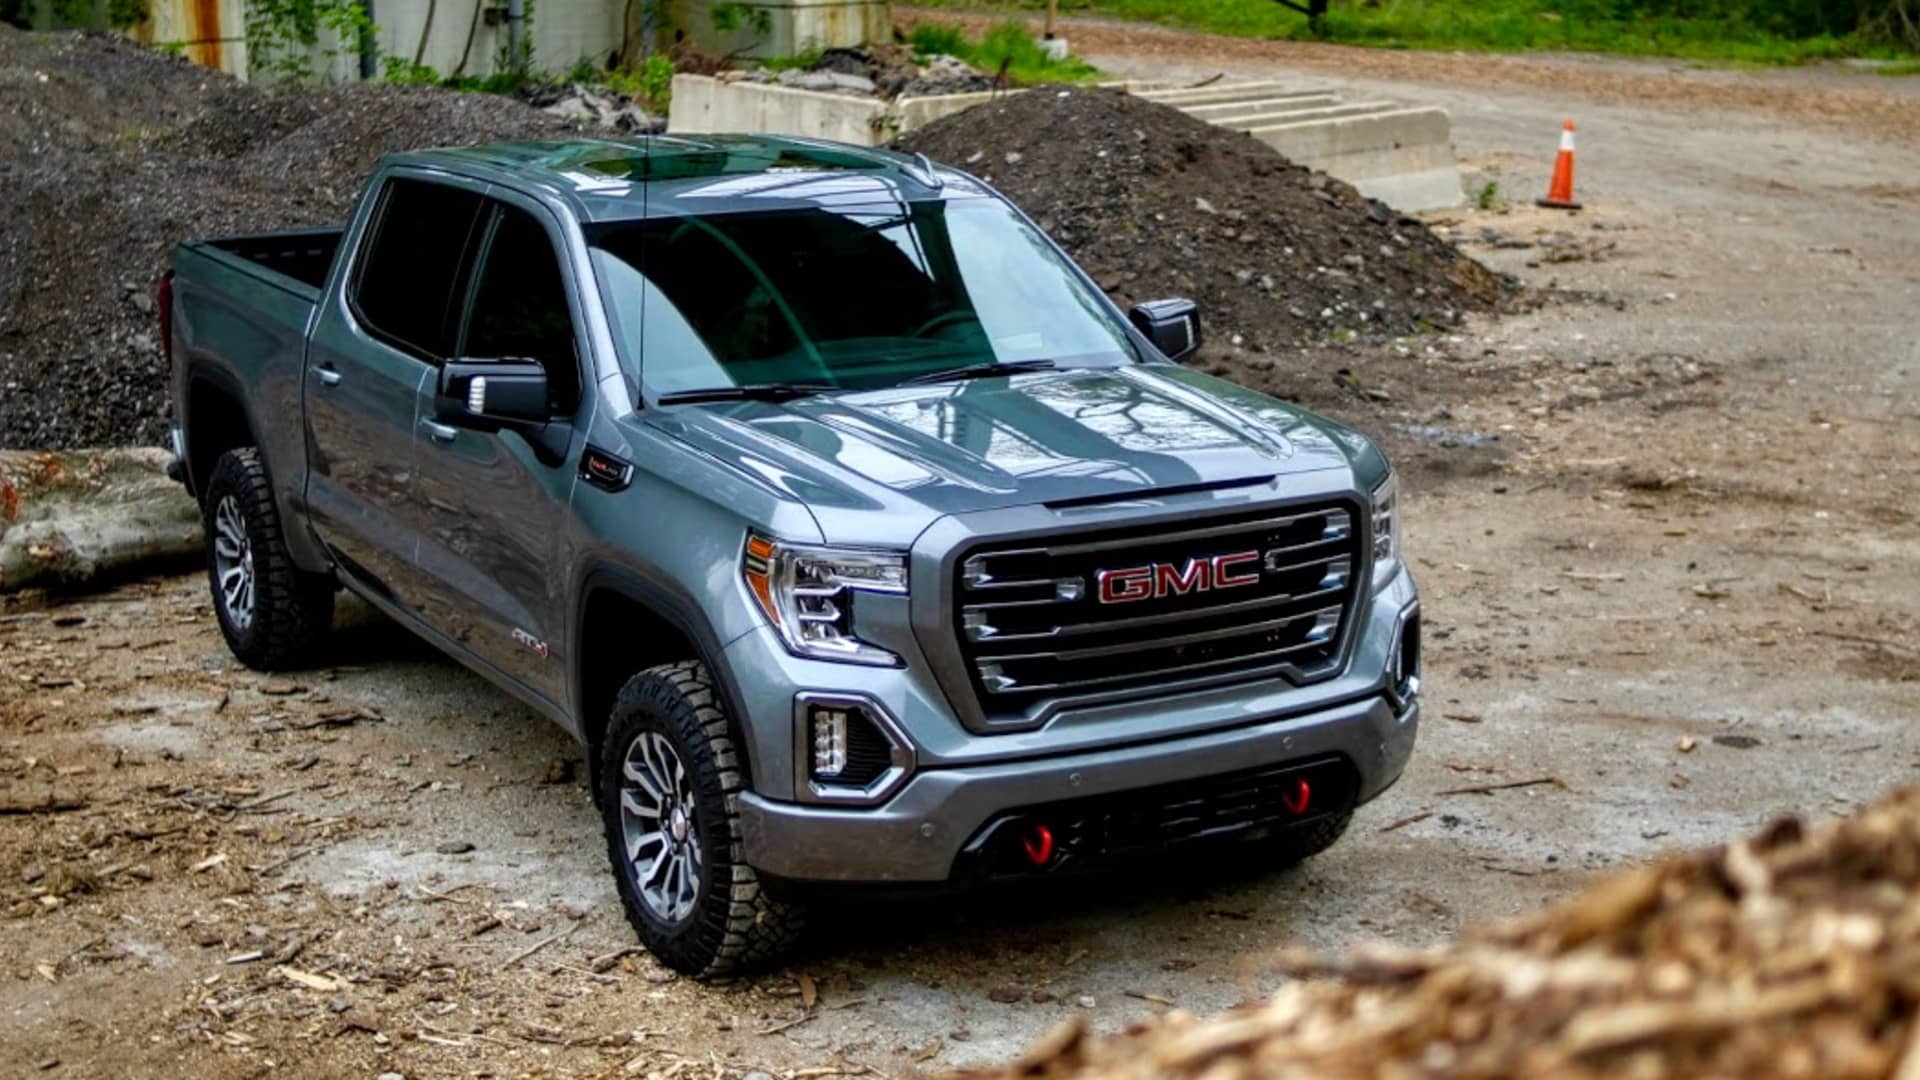 Review: The 2019 GMC Sierra AT4 is the off-road truck, refined